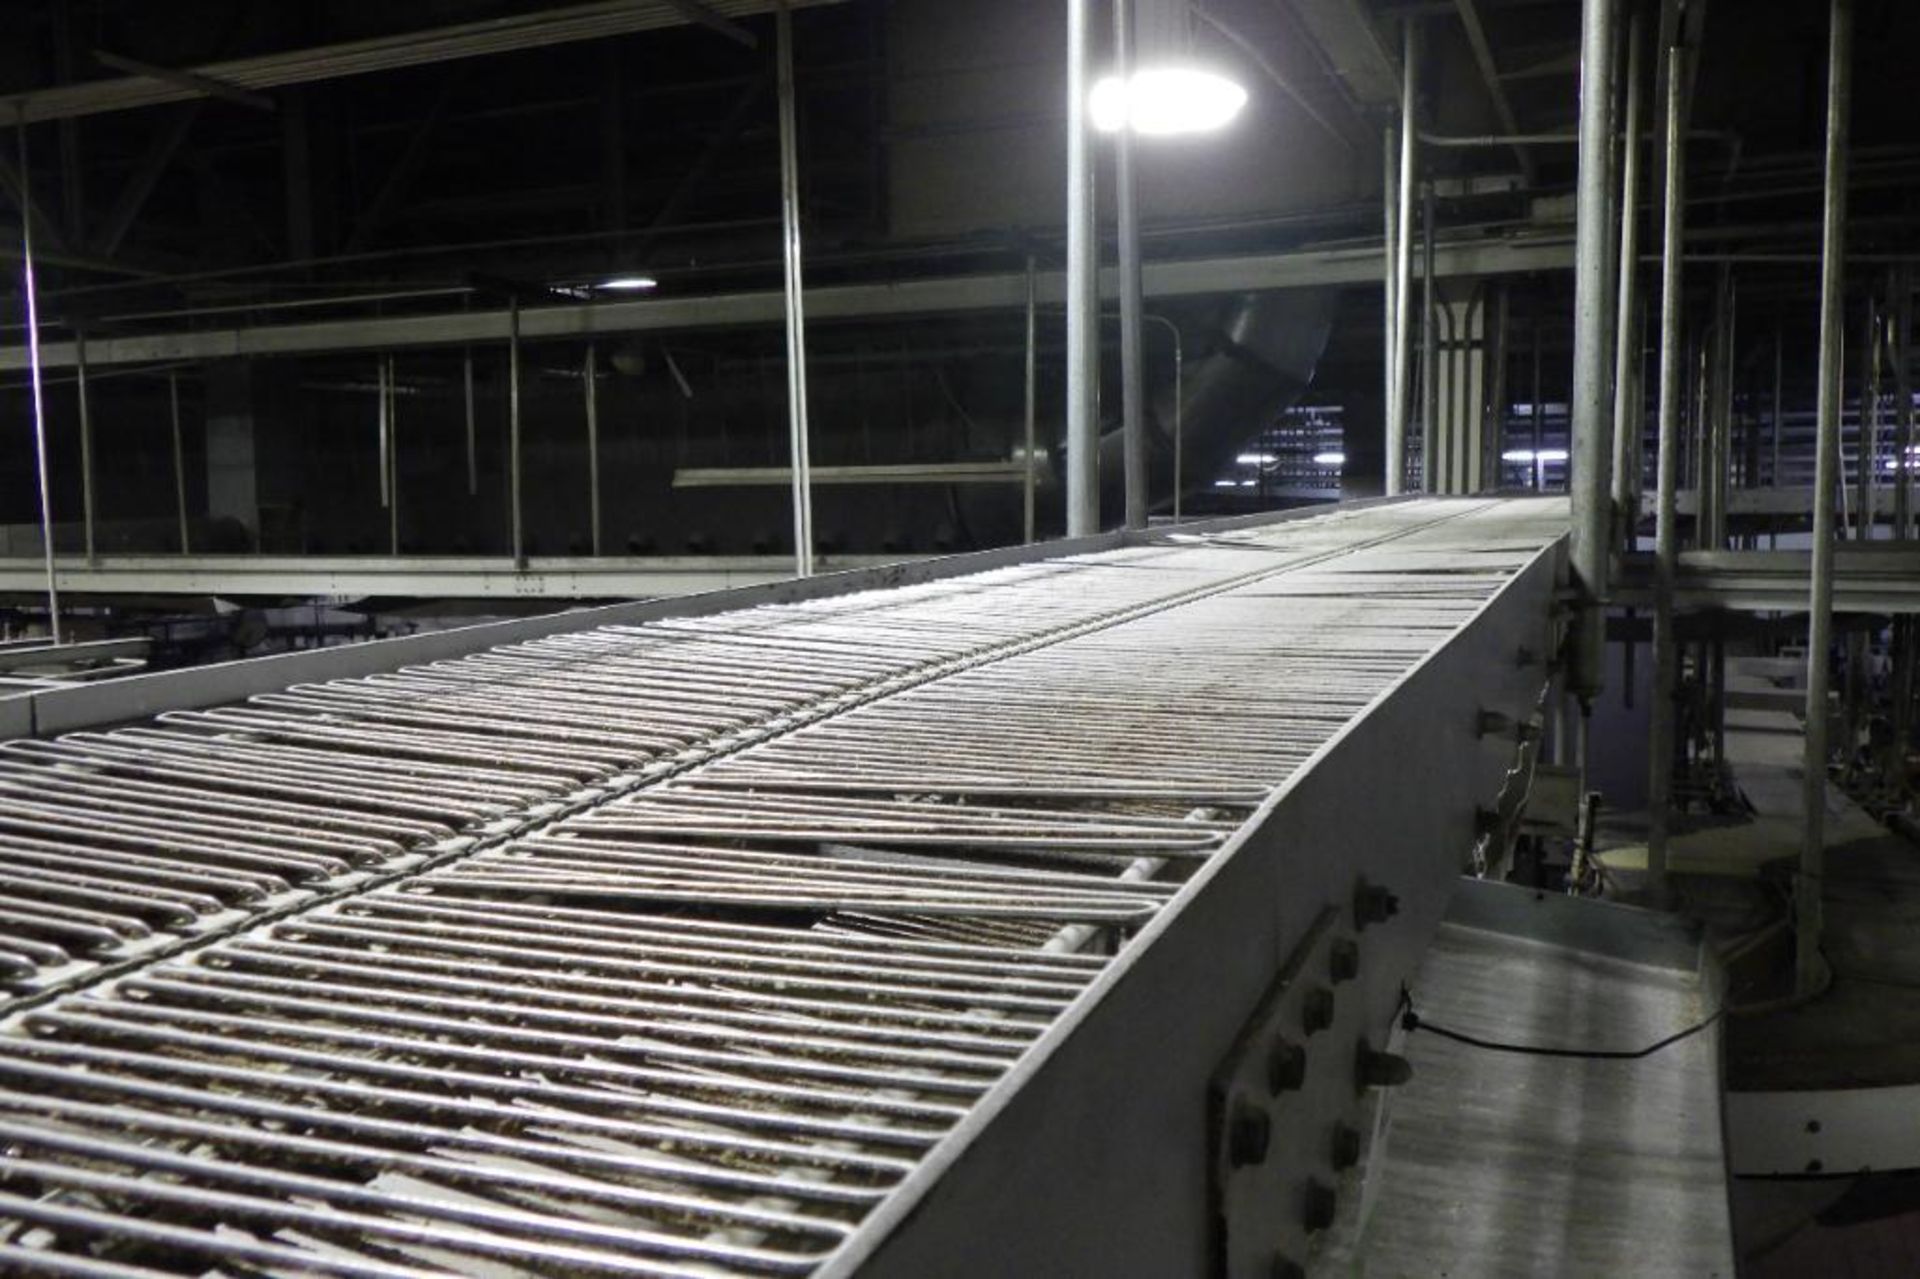 Stewart systems racetrack cooling conveyor - Image 5 of 32